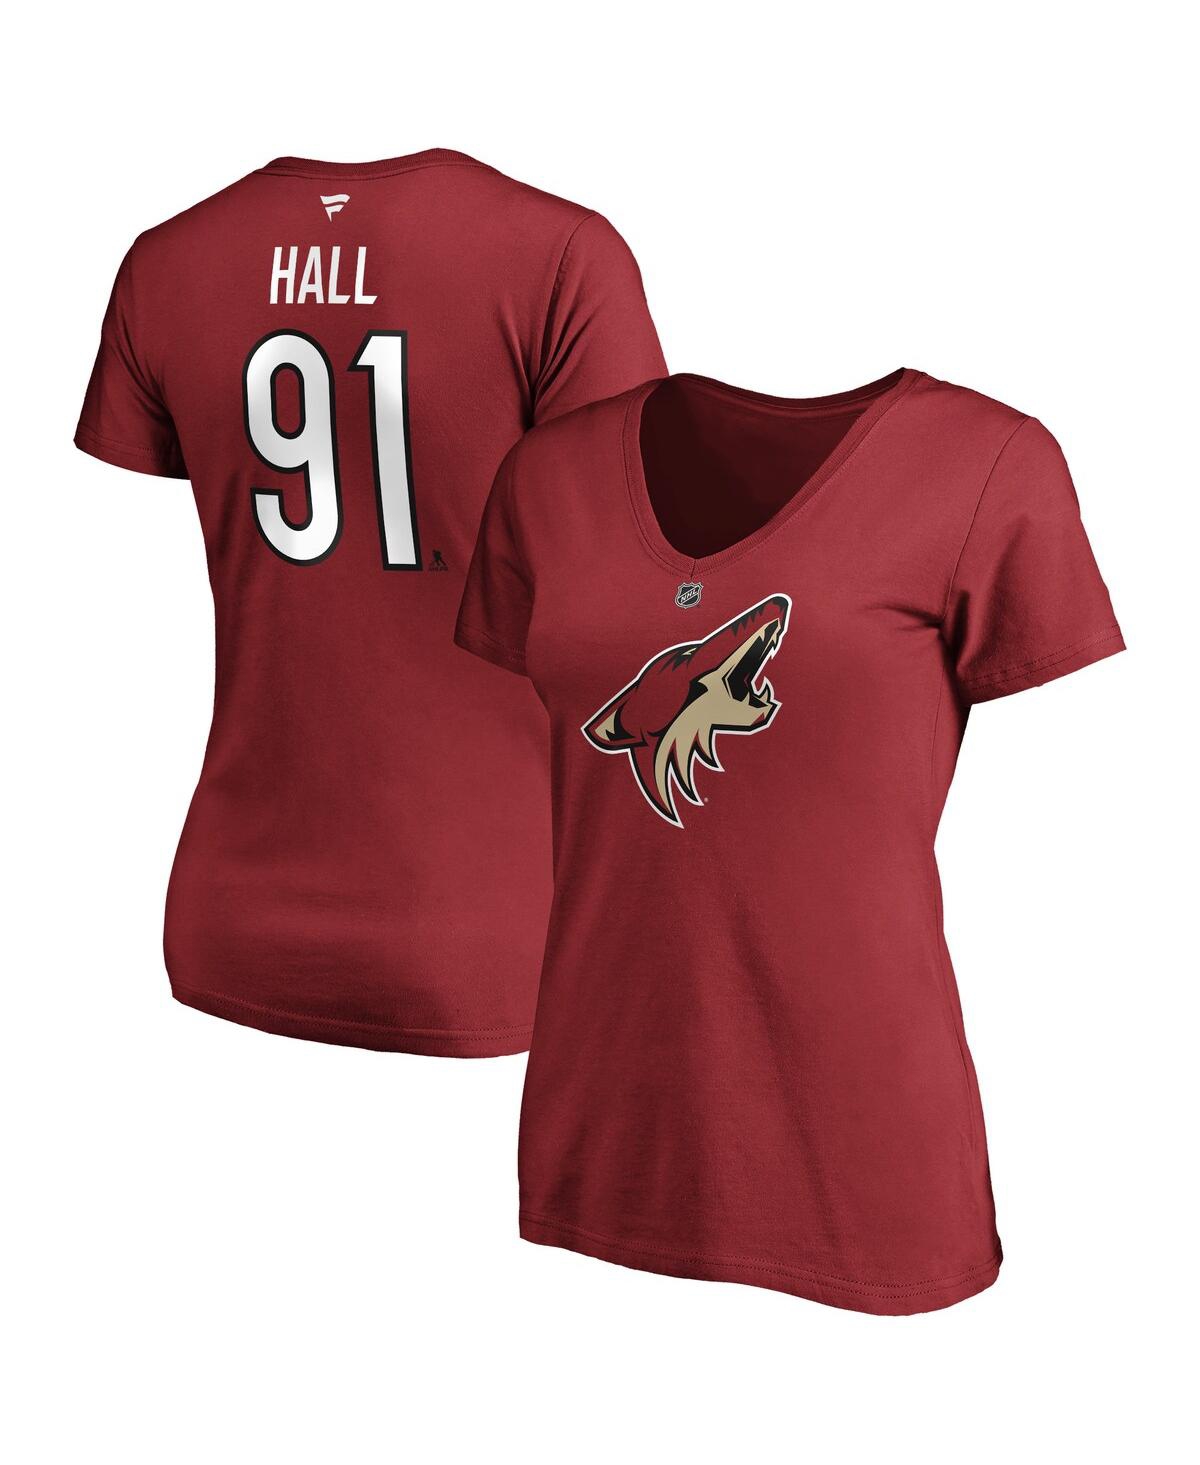 Fanatics Women's  Taylor Hall Garnet Arizona Coyotes Authentic Stack Name And Number V-neck T-shirt